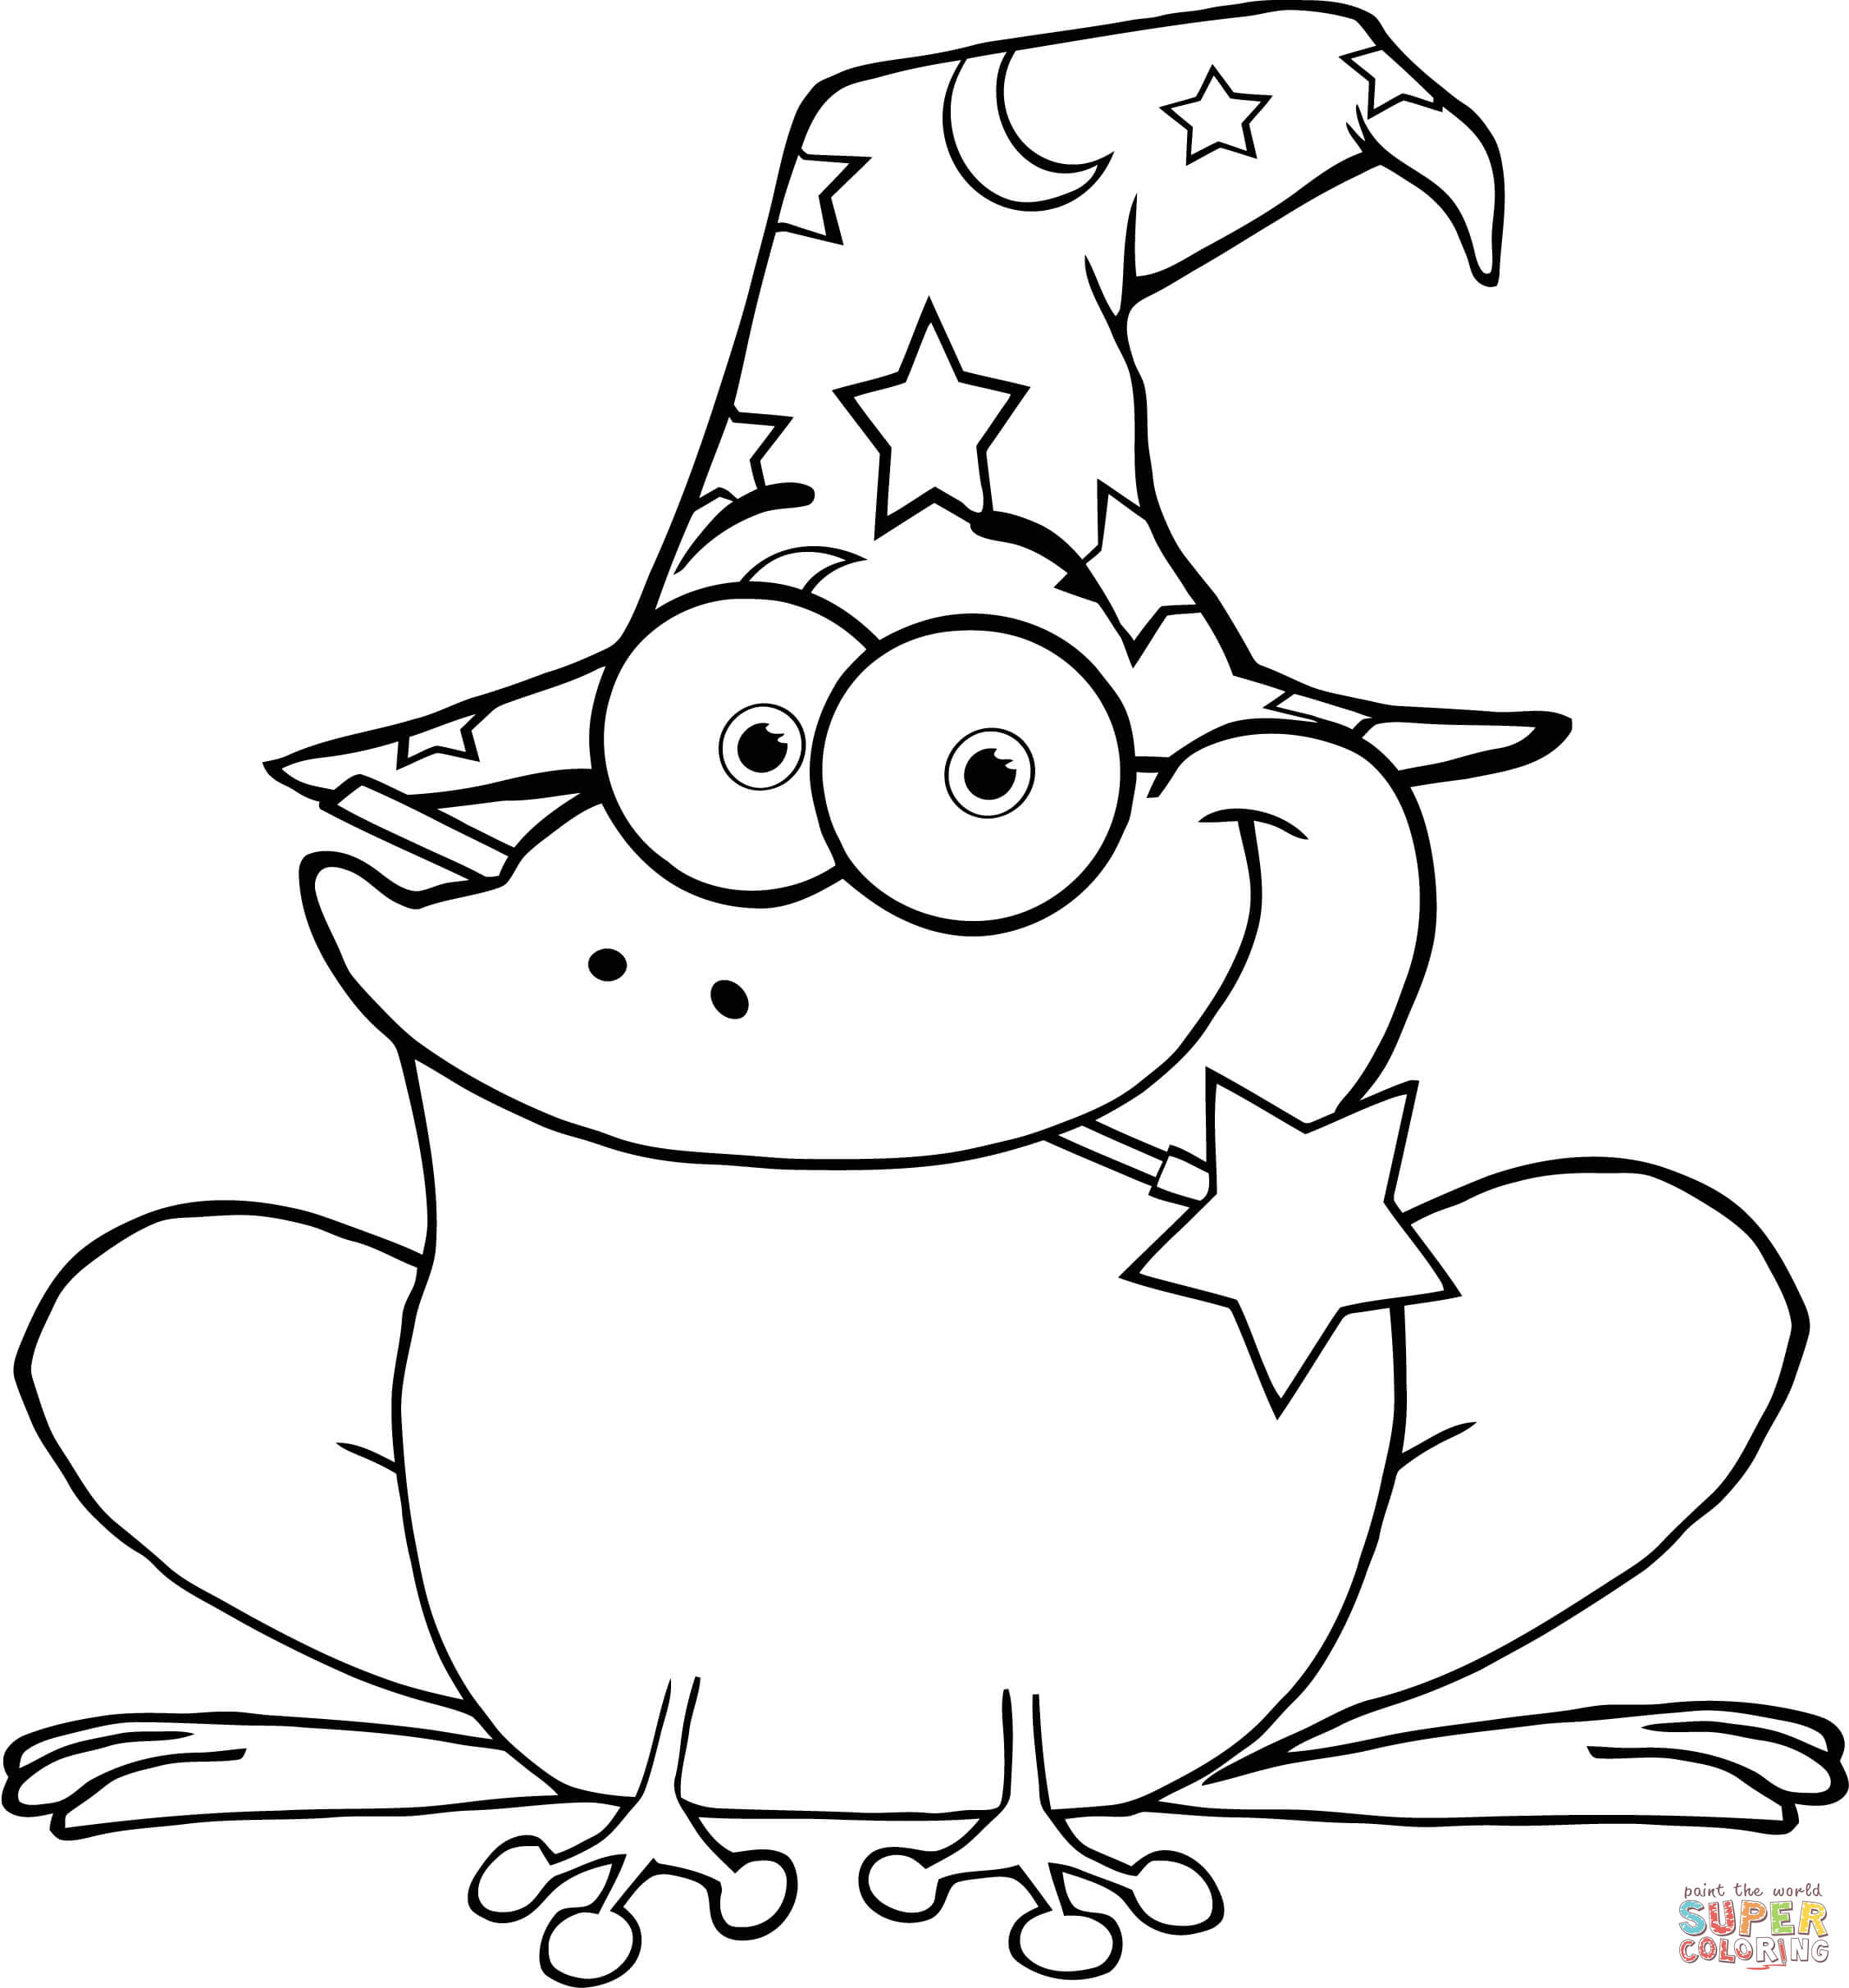 Wizard Frog with a Magic Wand in Mouth coloring page | Free Printable Coloring  Pages